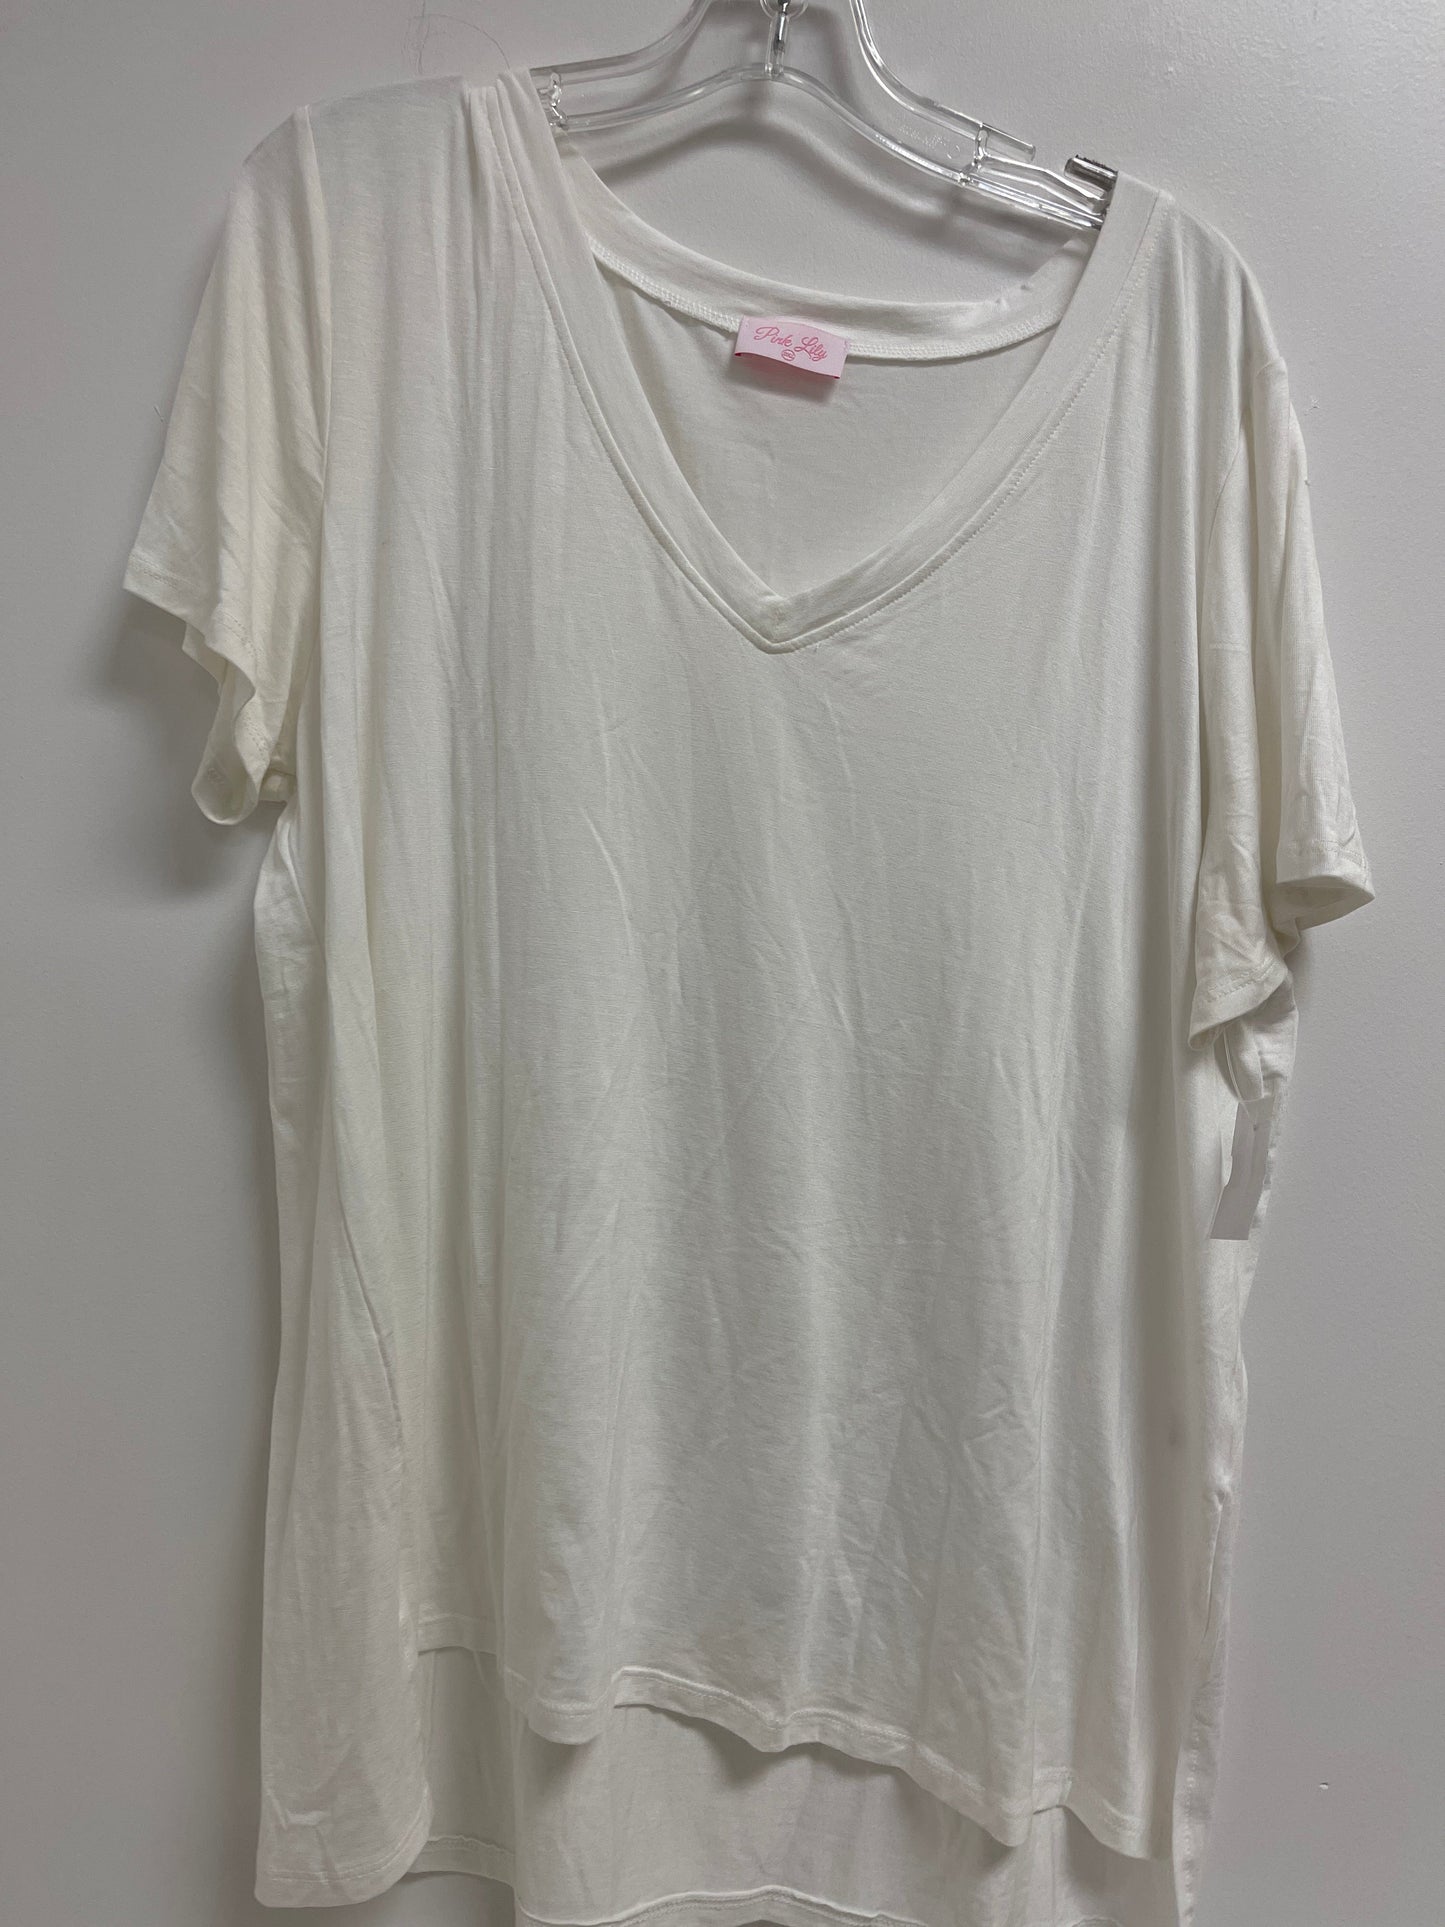 White Top Short Sleeve Pink Lily, Size 3x